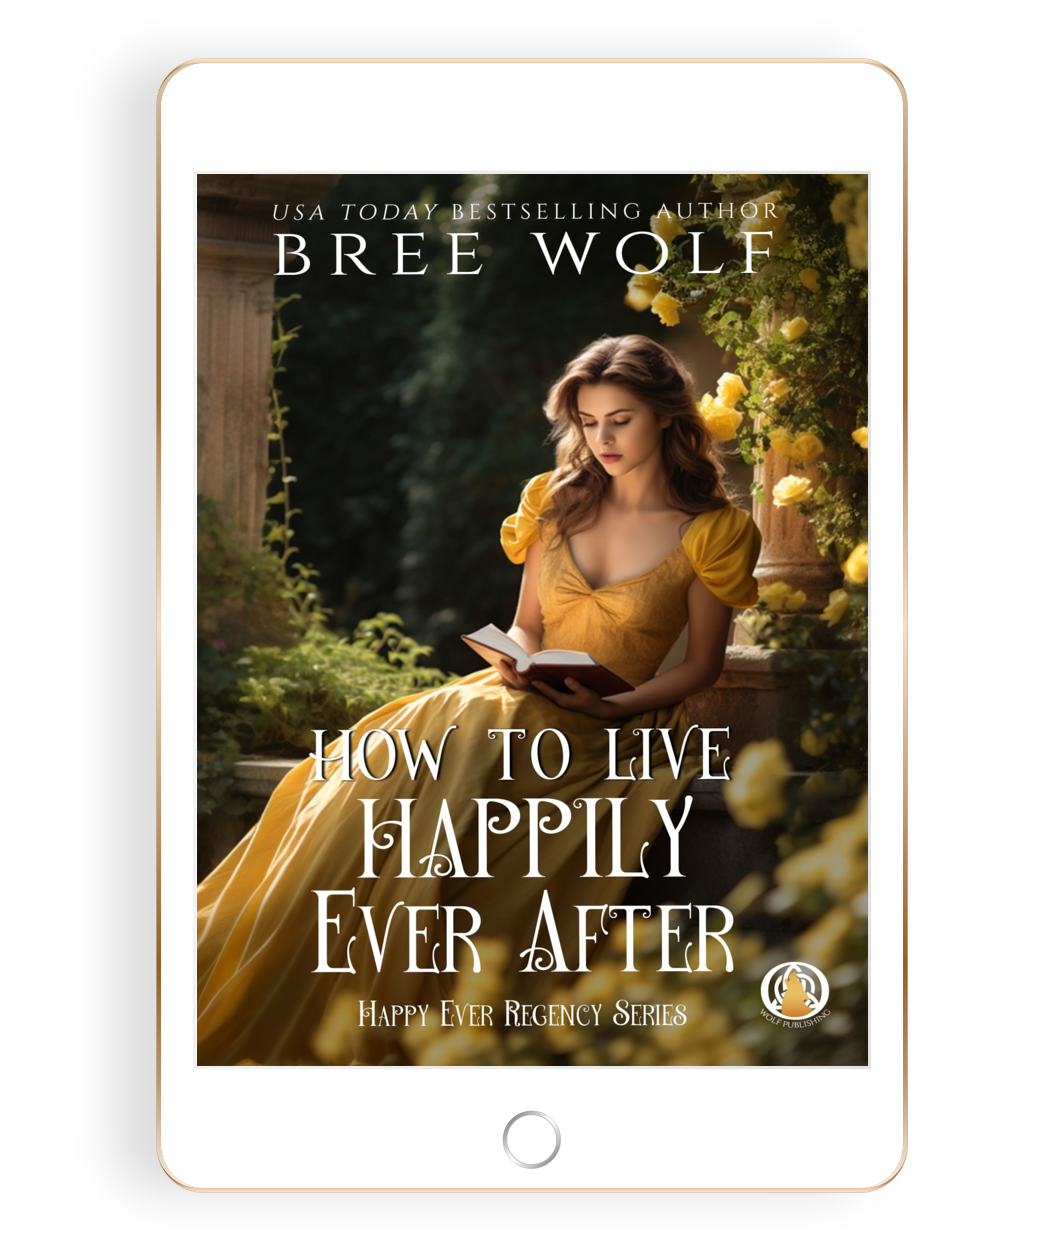 WOLF　How　Live　–　Ever　1)　to　(Book　After　Happily　Publishing